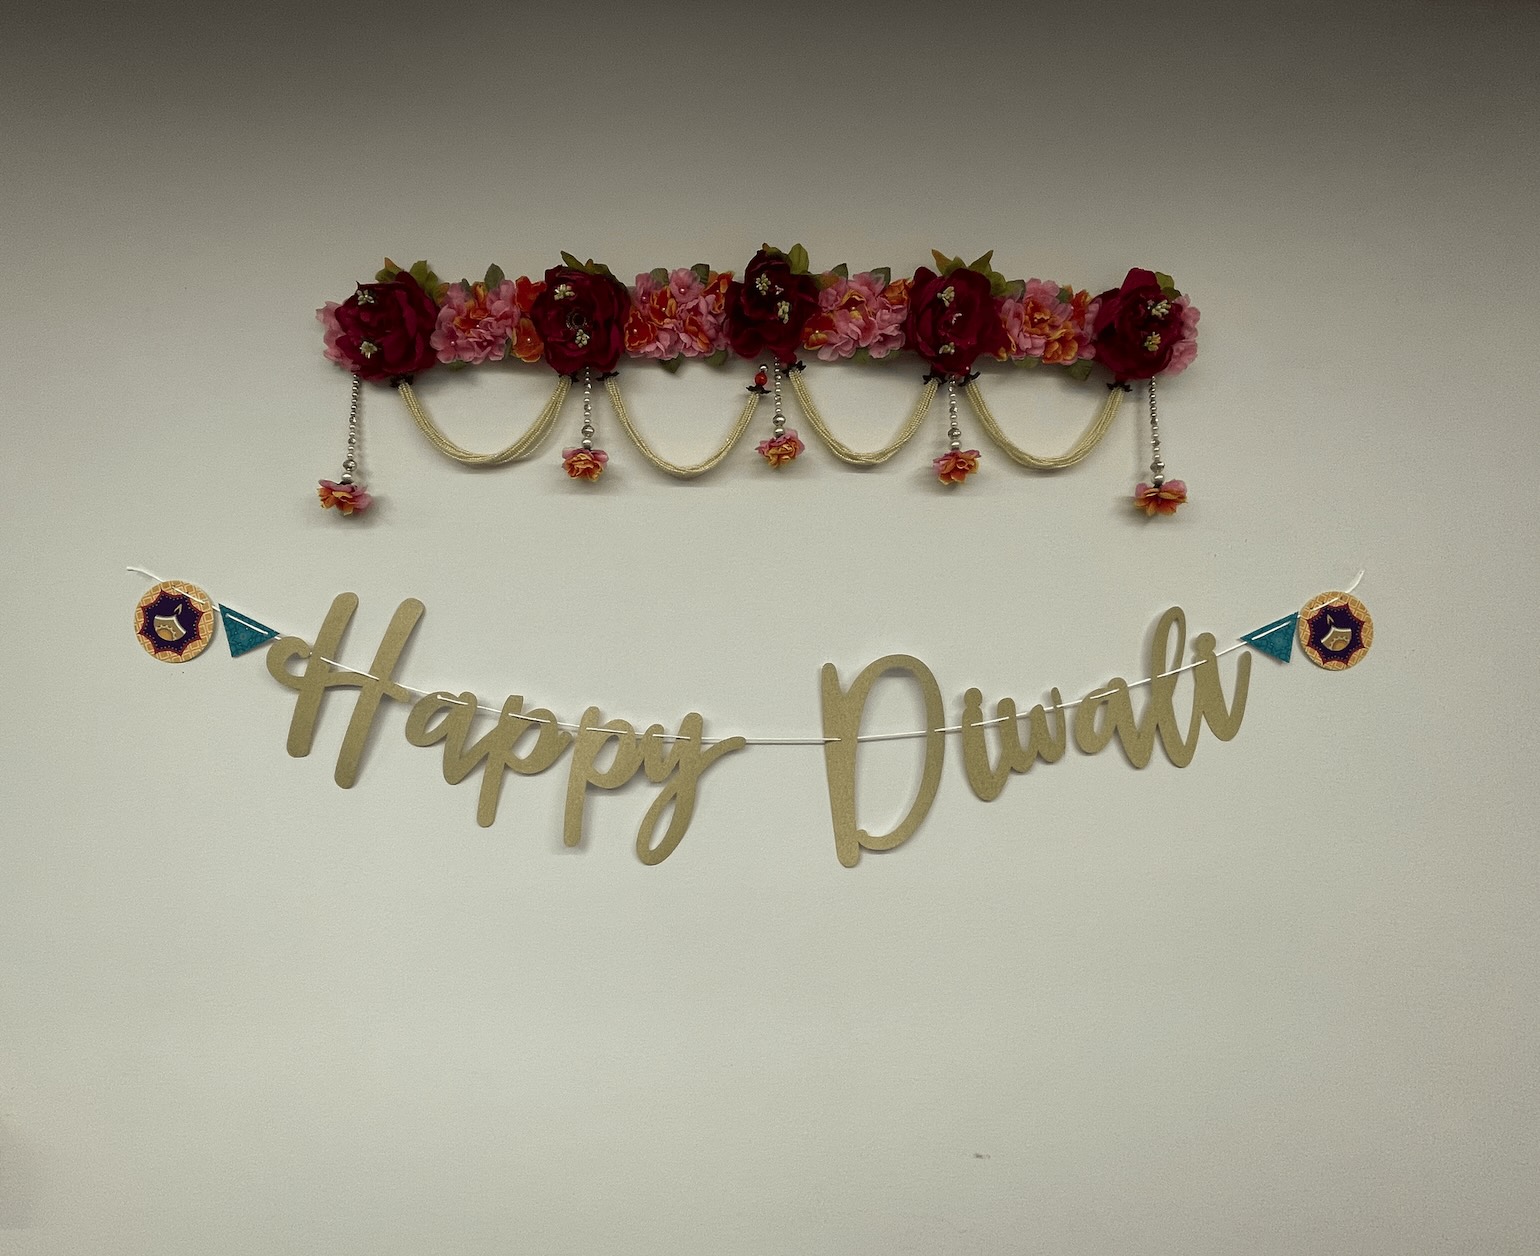 A decorative "happy Diwali" sign with letters in cursive, adorned with colorful flowers and hanging ornaments against a plain wall at GKG’s Headquarters.